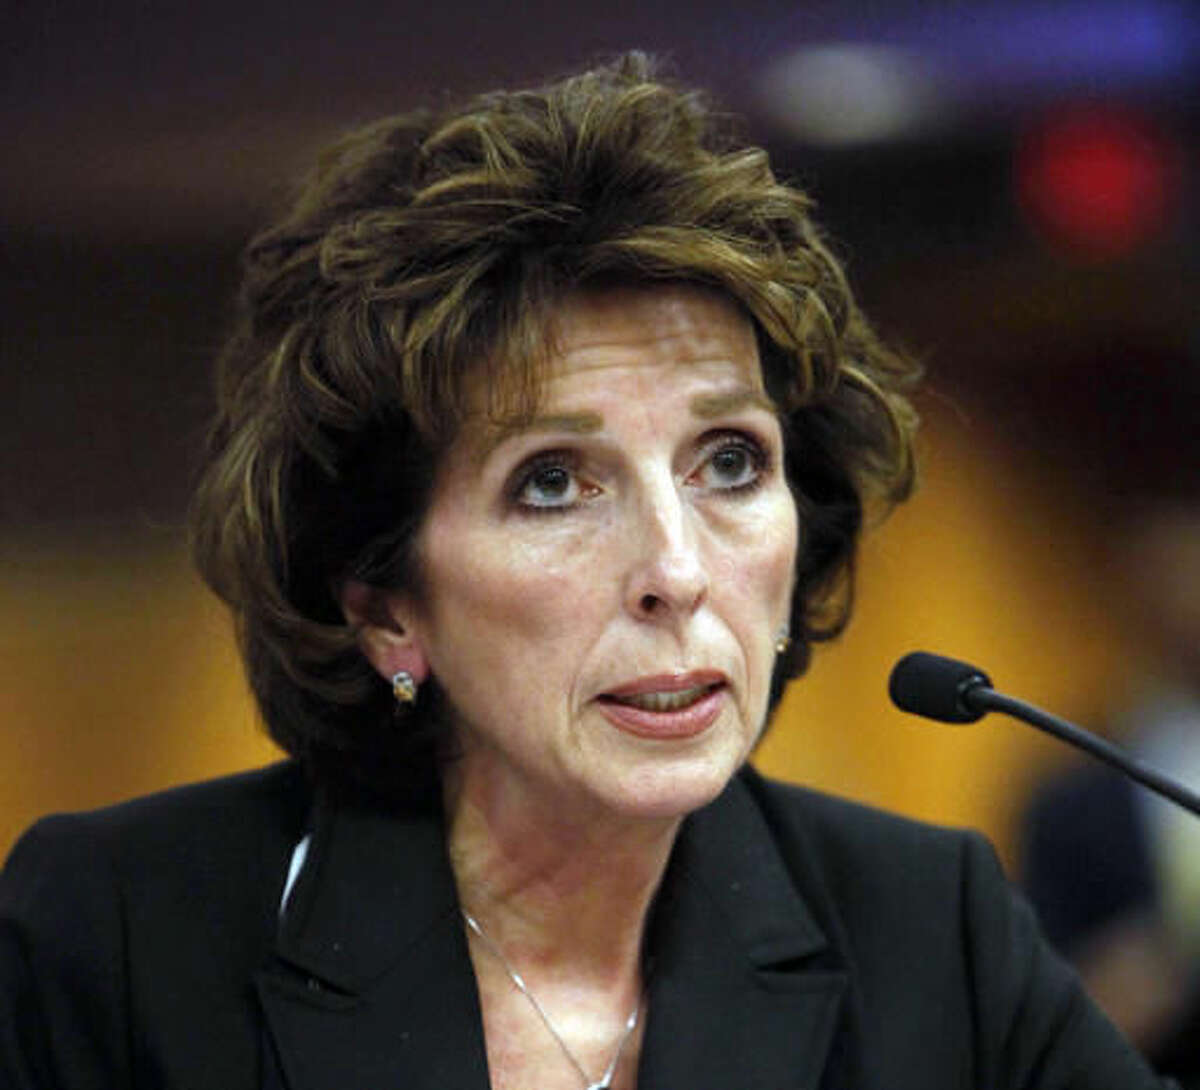 FILE - In this Dec. 14, 2011 file photo, University of California, Davis Chancellor Linda Katehi tells lawmakers that she never ordered campus police to use force or pepper spray on students, while testifying at a legislative hearing at the Capitol in Sacramento, Calif. The University of California announced that the embattled chancellor of UC Davis has resigned effective Tuesday, Aug. 9, 2016. University of California Chancellor Janet Napolitano said in a statement that the investigation found numerous instances where Katehi was not candid with her office, exercised poor judgment and violated university policies. (AP Photo/Rich Pedroncelli, File)